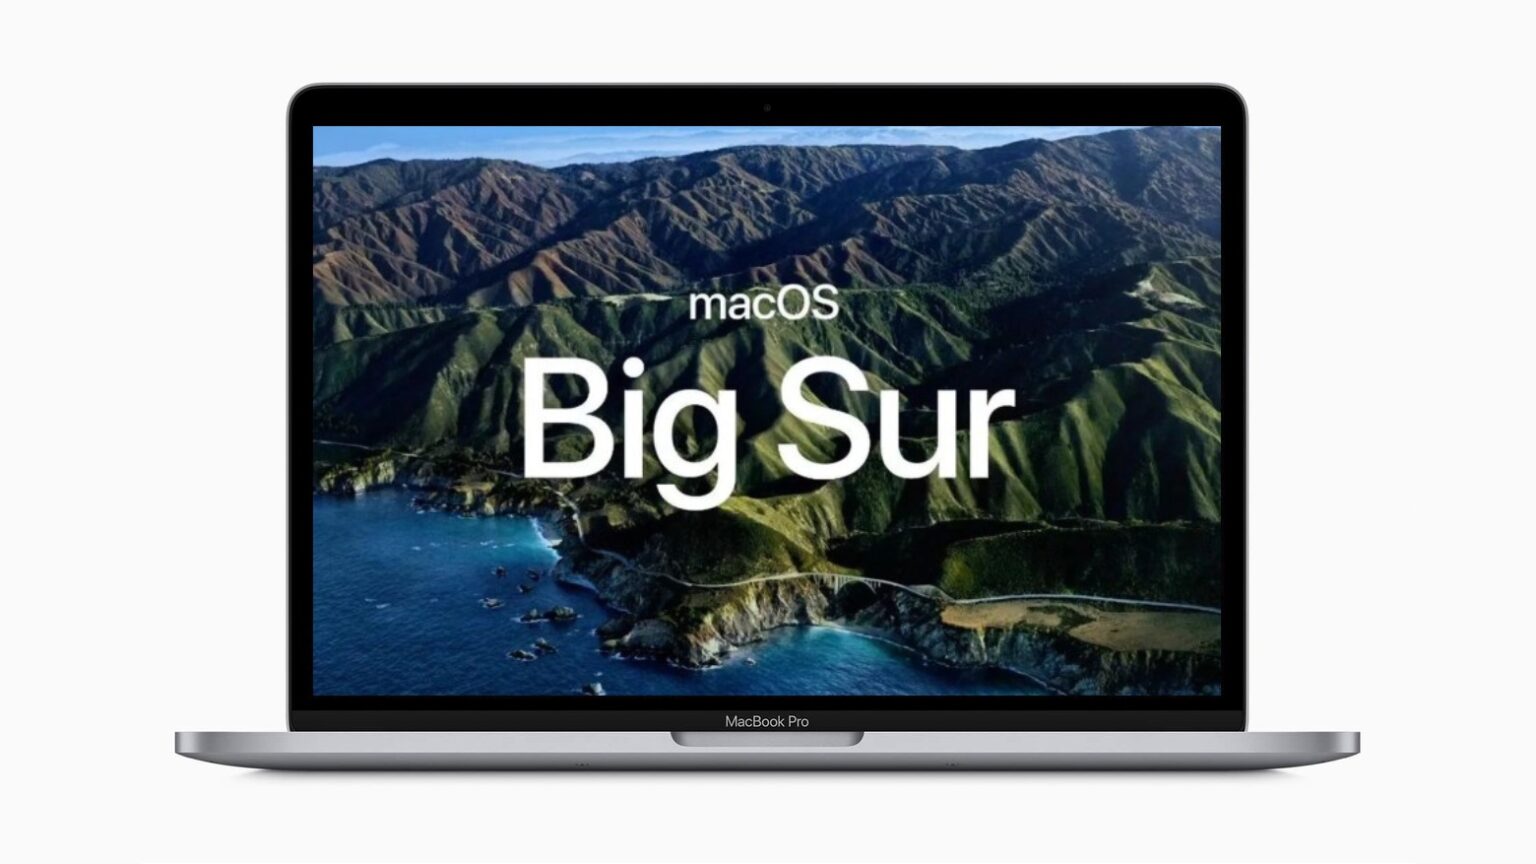 macOS 11.1 beta 1 was seeded to developers on November 17.